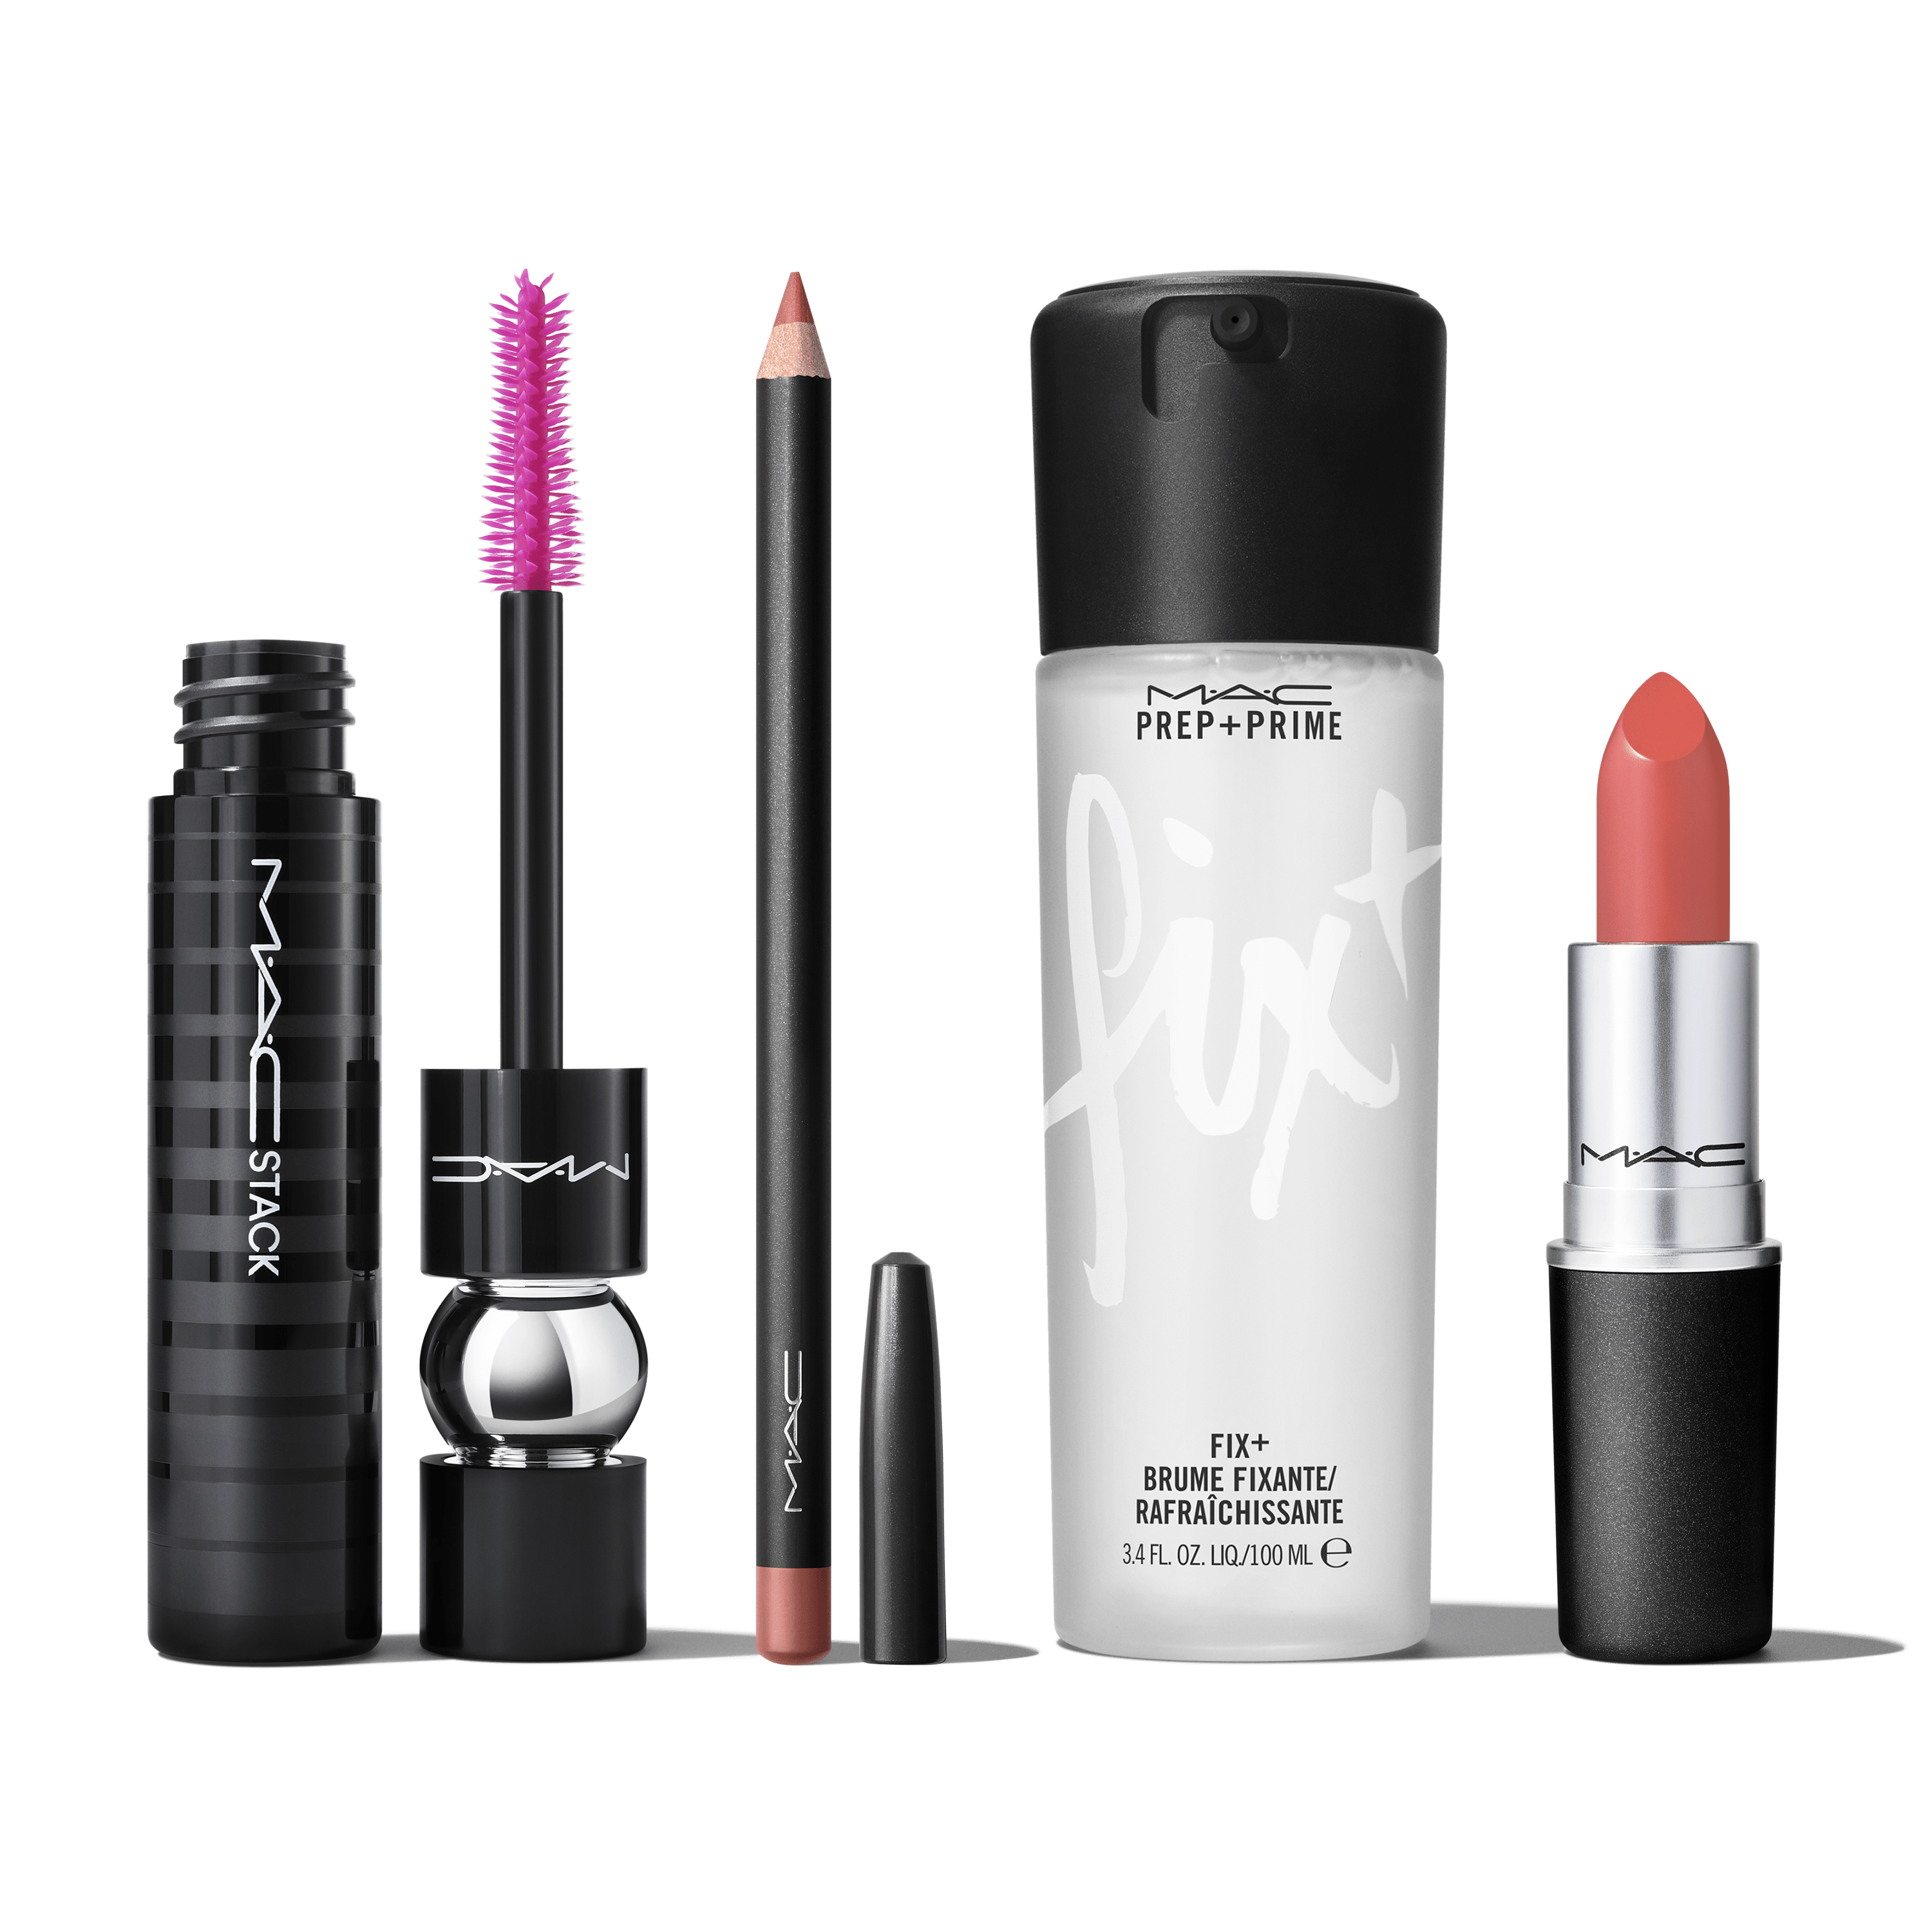 Perfume Malaysia - M-a-c Makeup Set for Women 9 in 1 Gift Set This Mac set  comes with the following items: 1 x NC20 Studio Fix, 1 x Pinekswoon A55  Sheertione Blush,